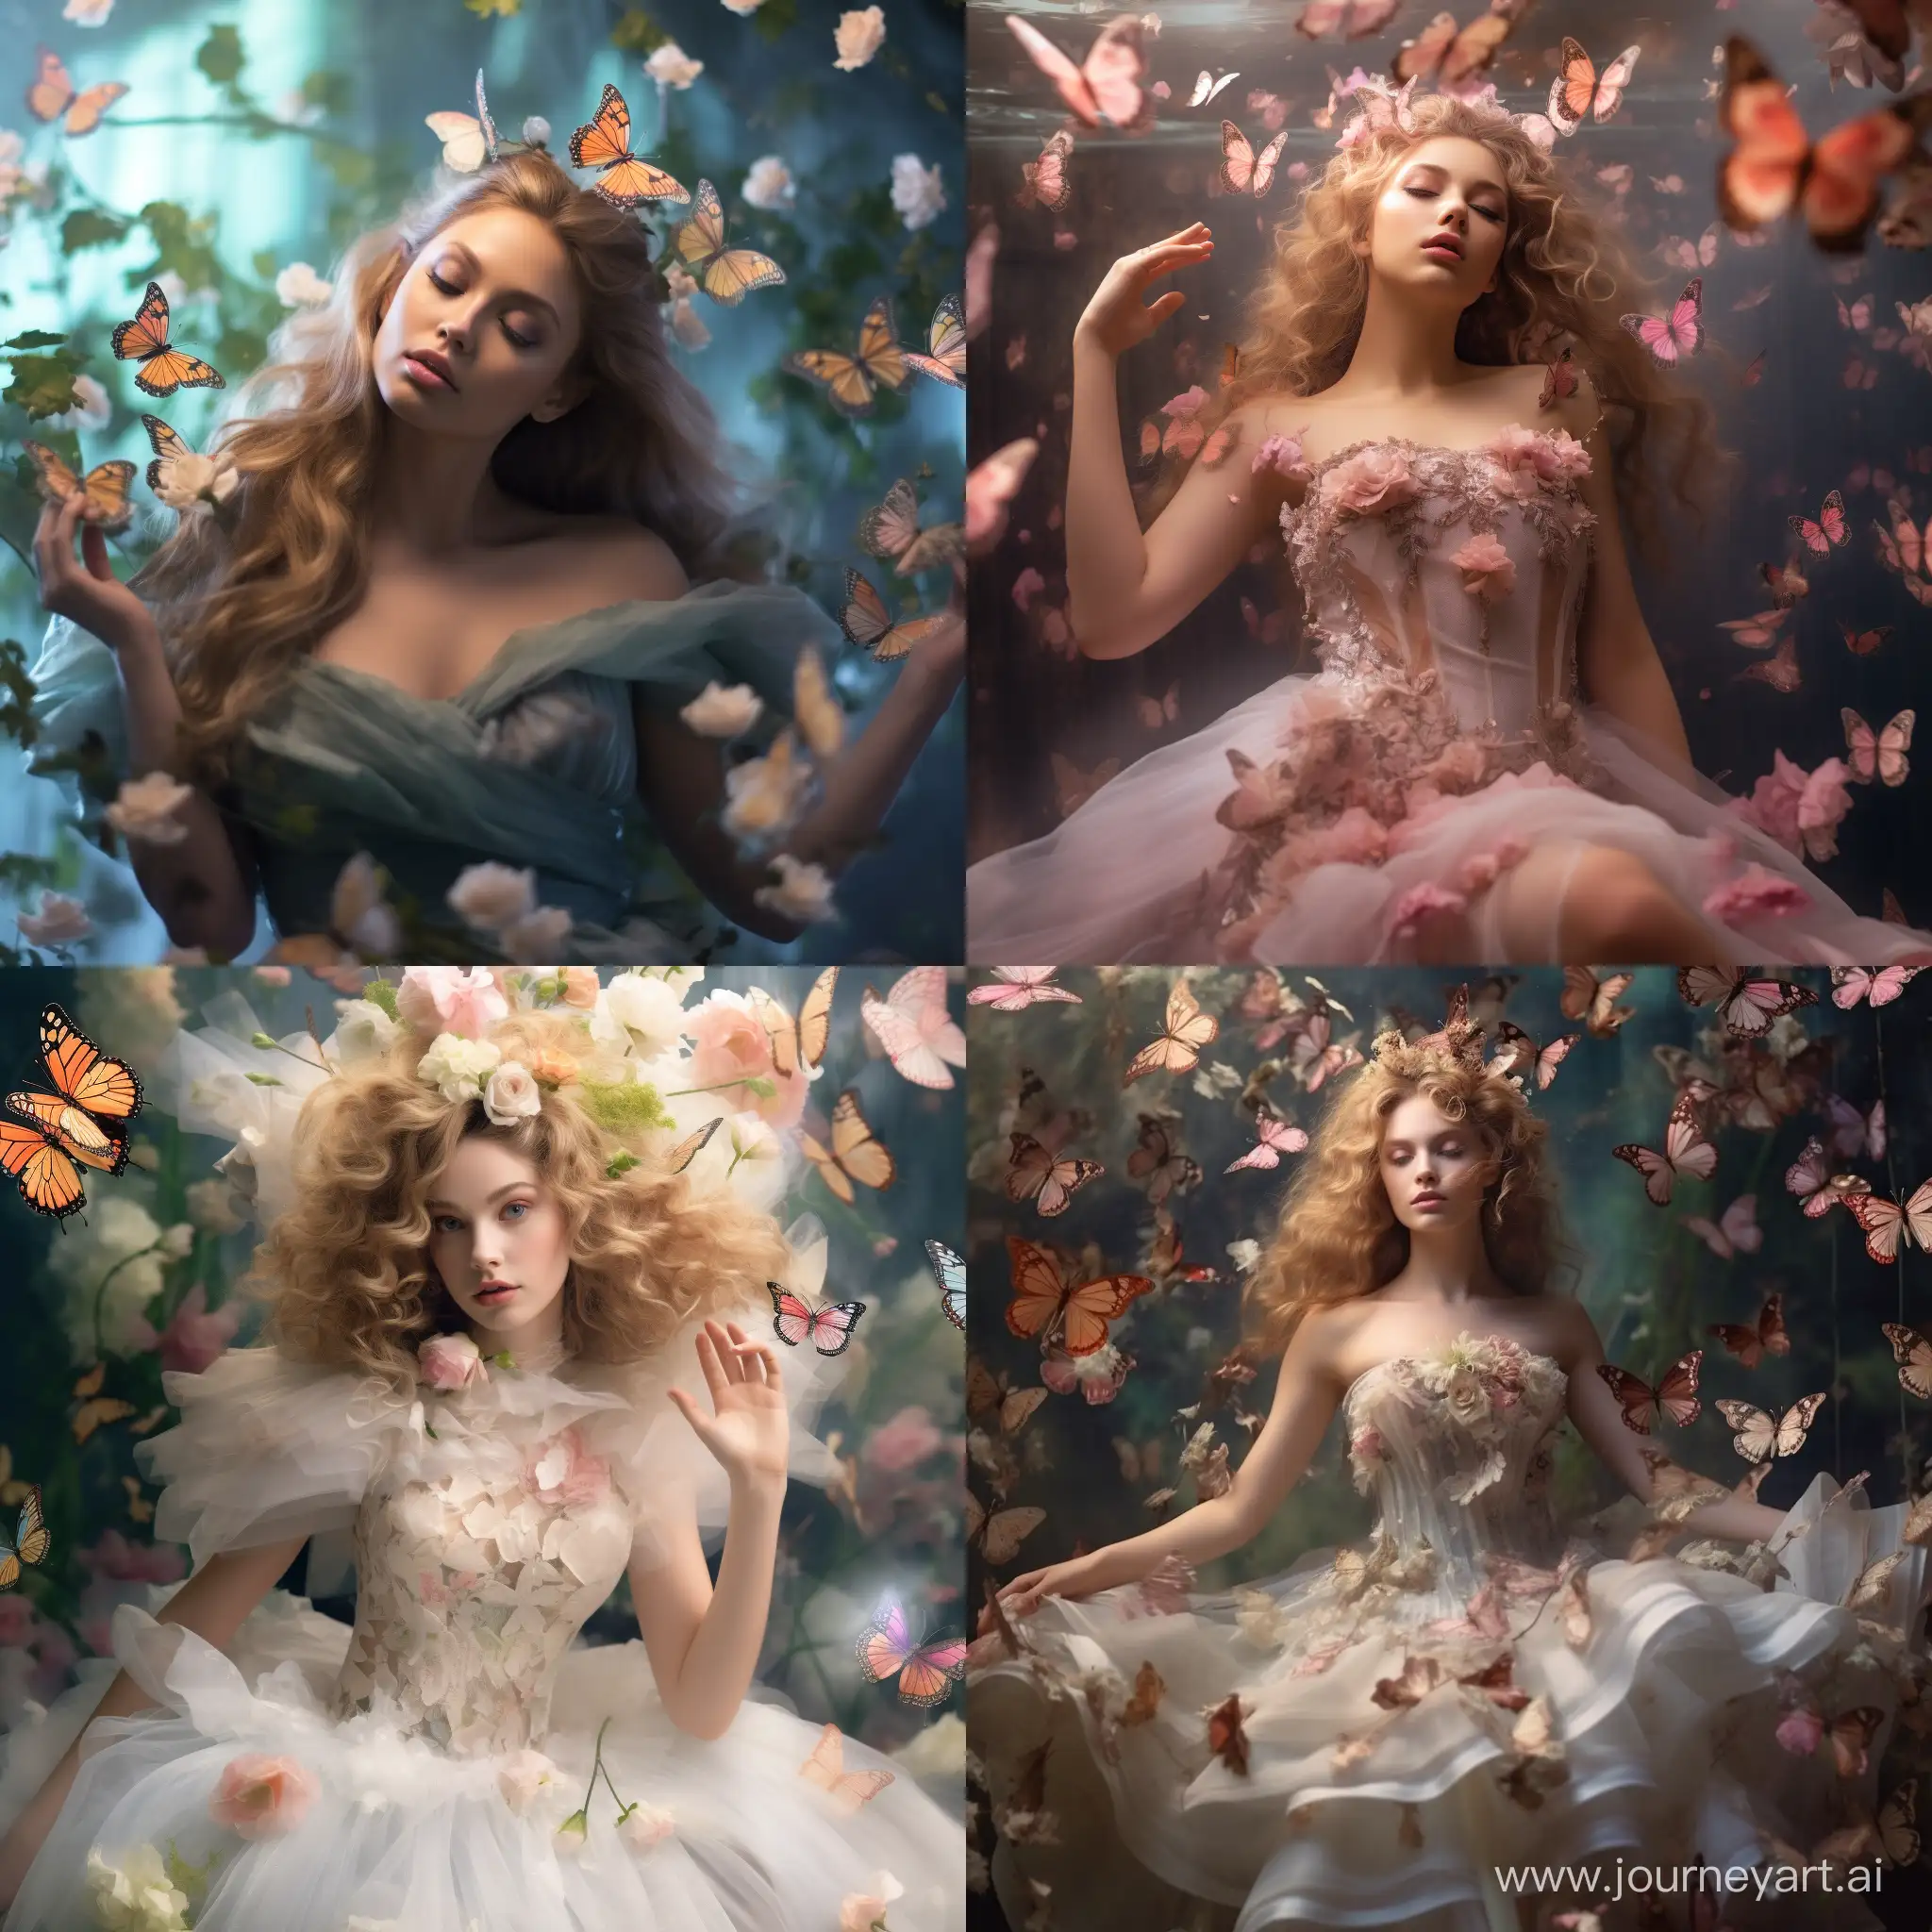 kelly boesch style, whimsical dreamy model, unique fantastical outfit, nature fantasy elements, floating flowers butterflies, lush garden, soft ethereal lighting, 9:16 aspect ratio, moderate artistic level